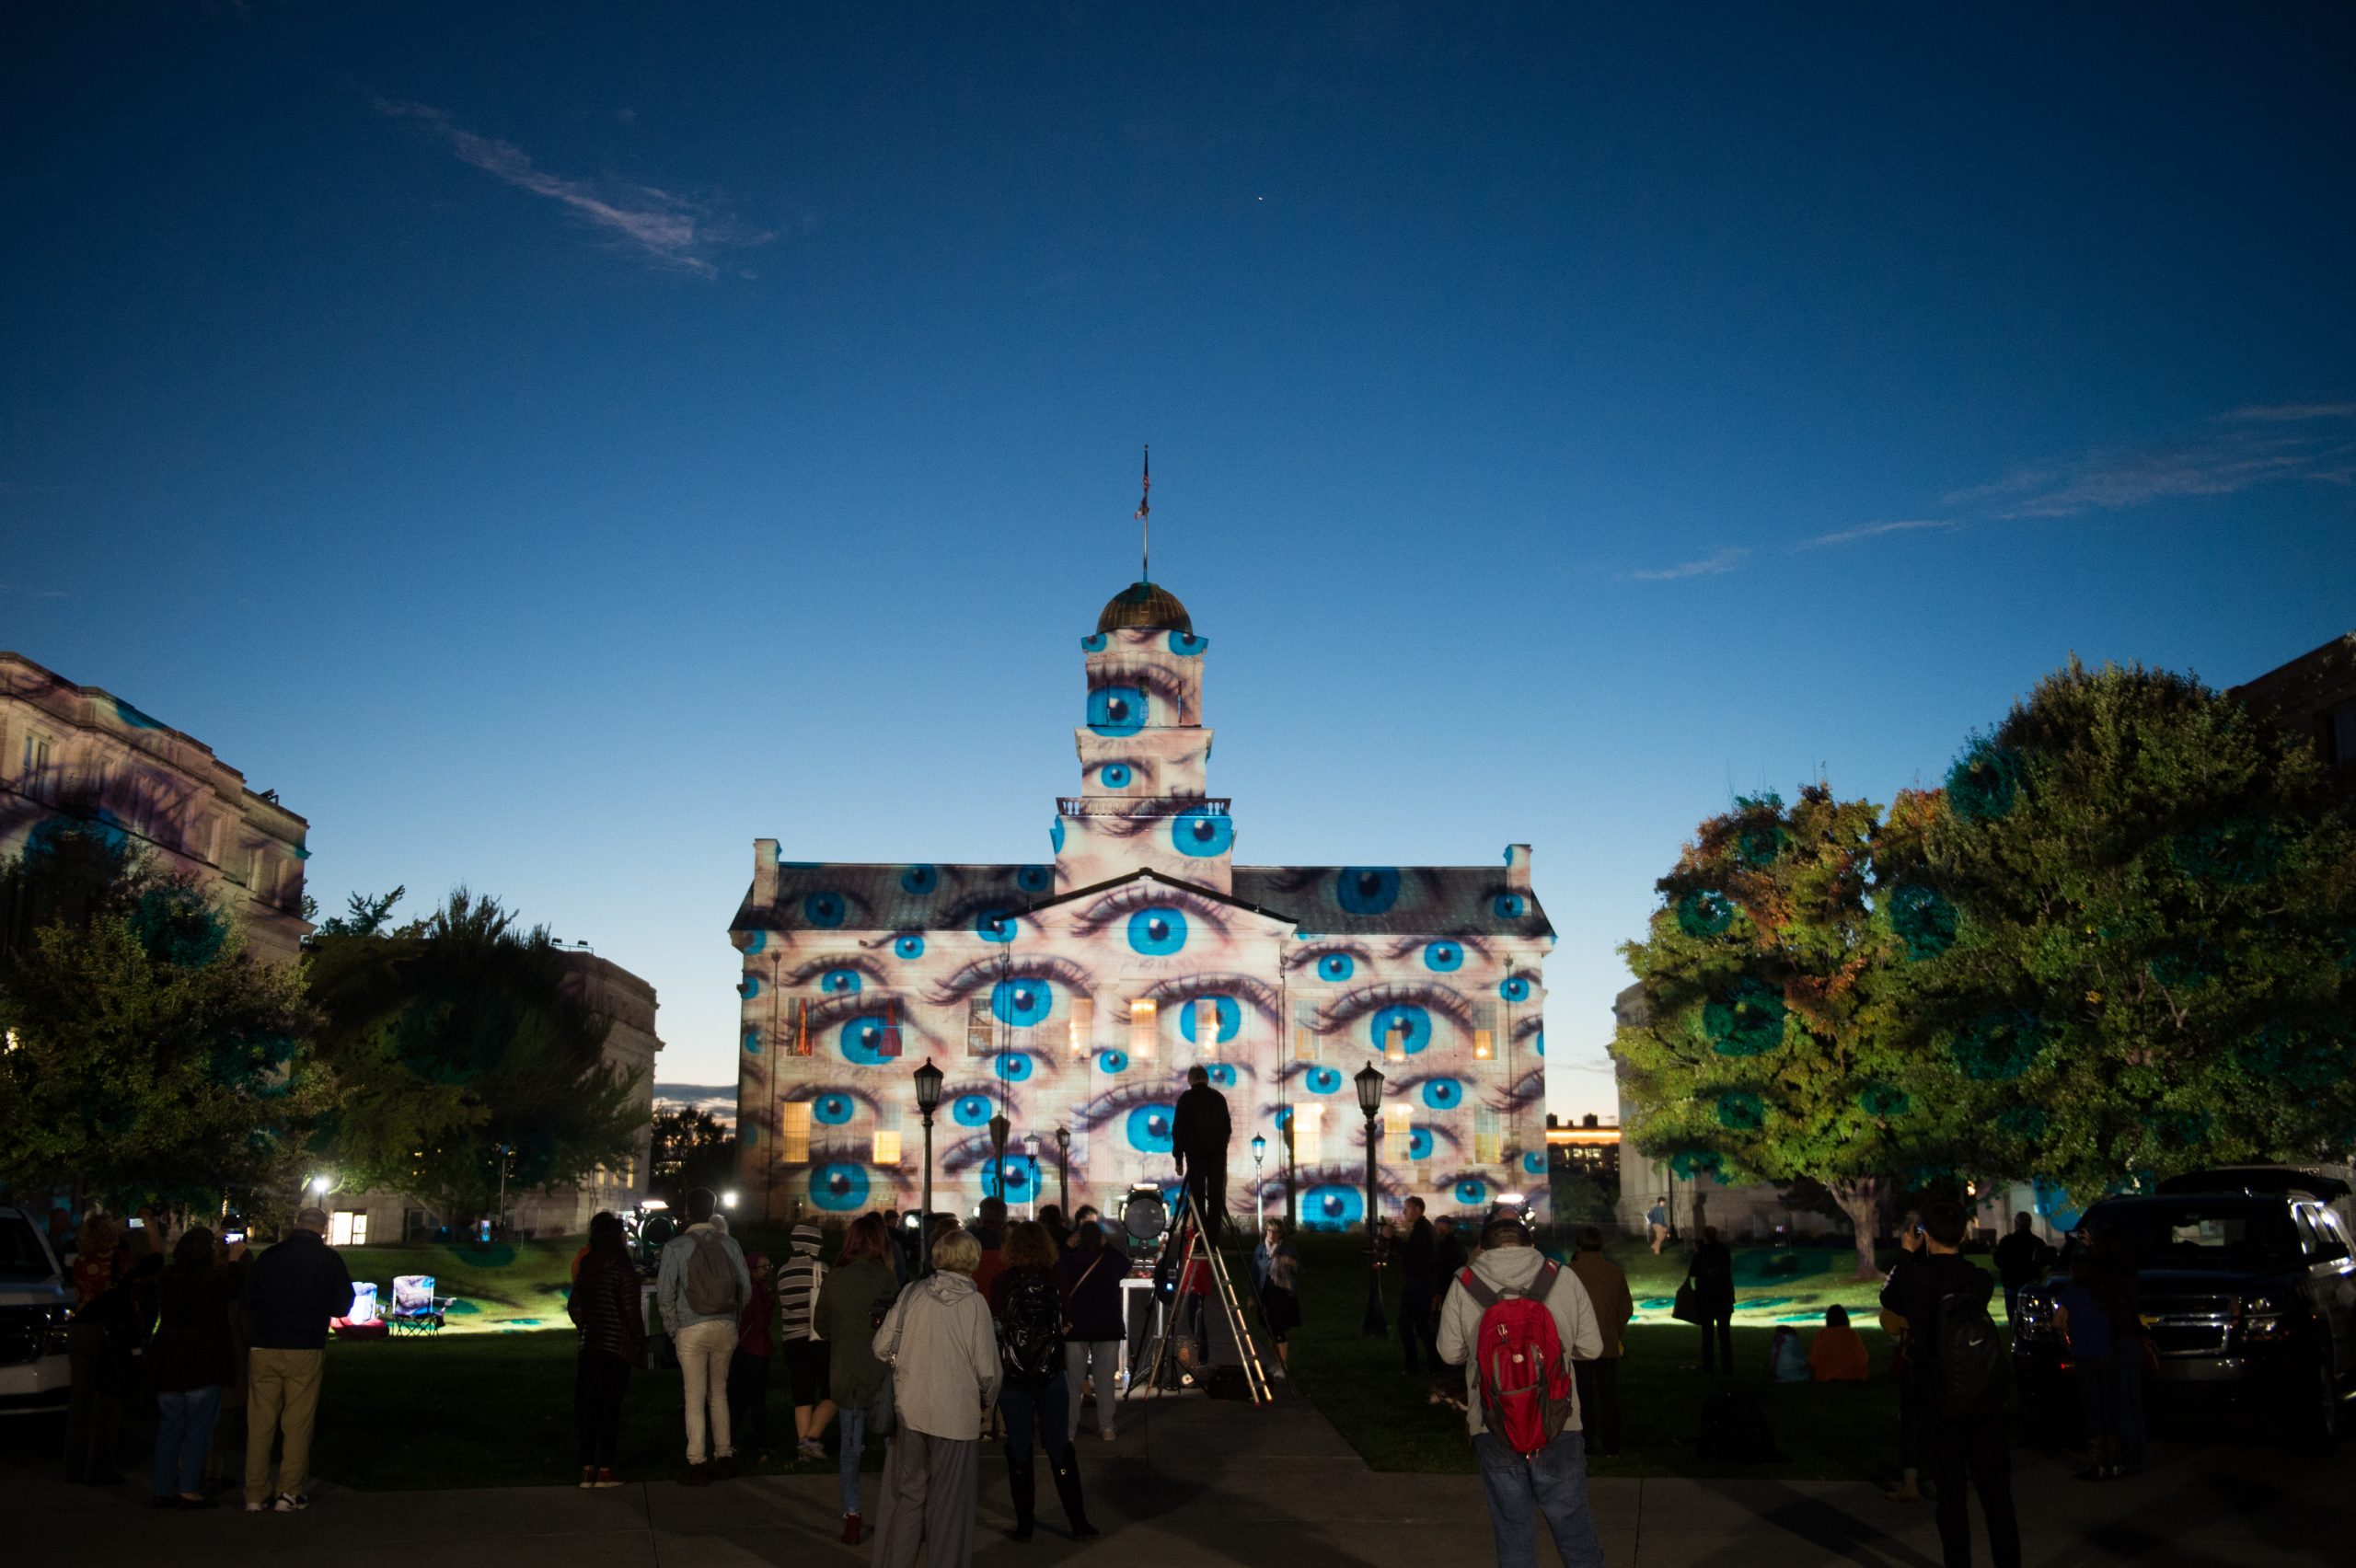 Blue eyes projected onto the Old Capitol as part of a light show by light artist Gerry Hofstetter.